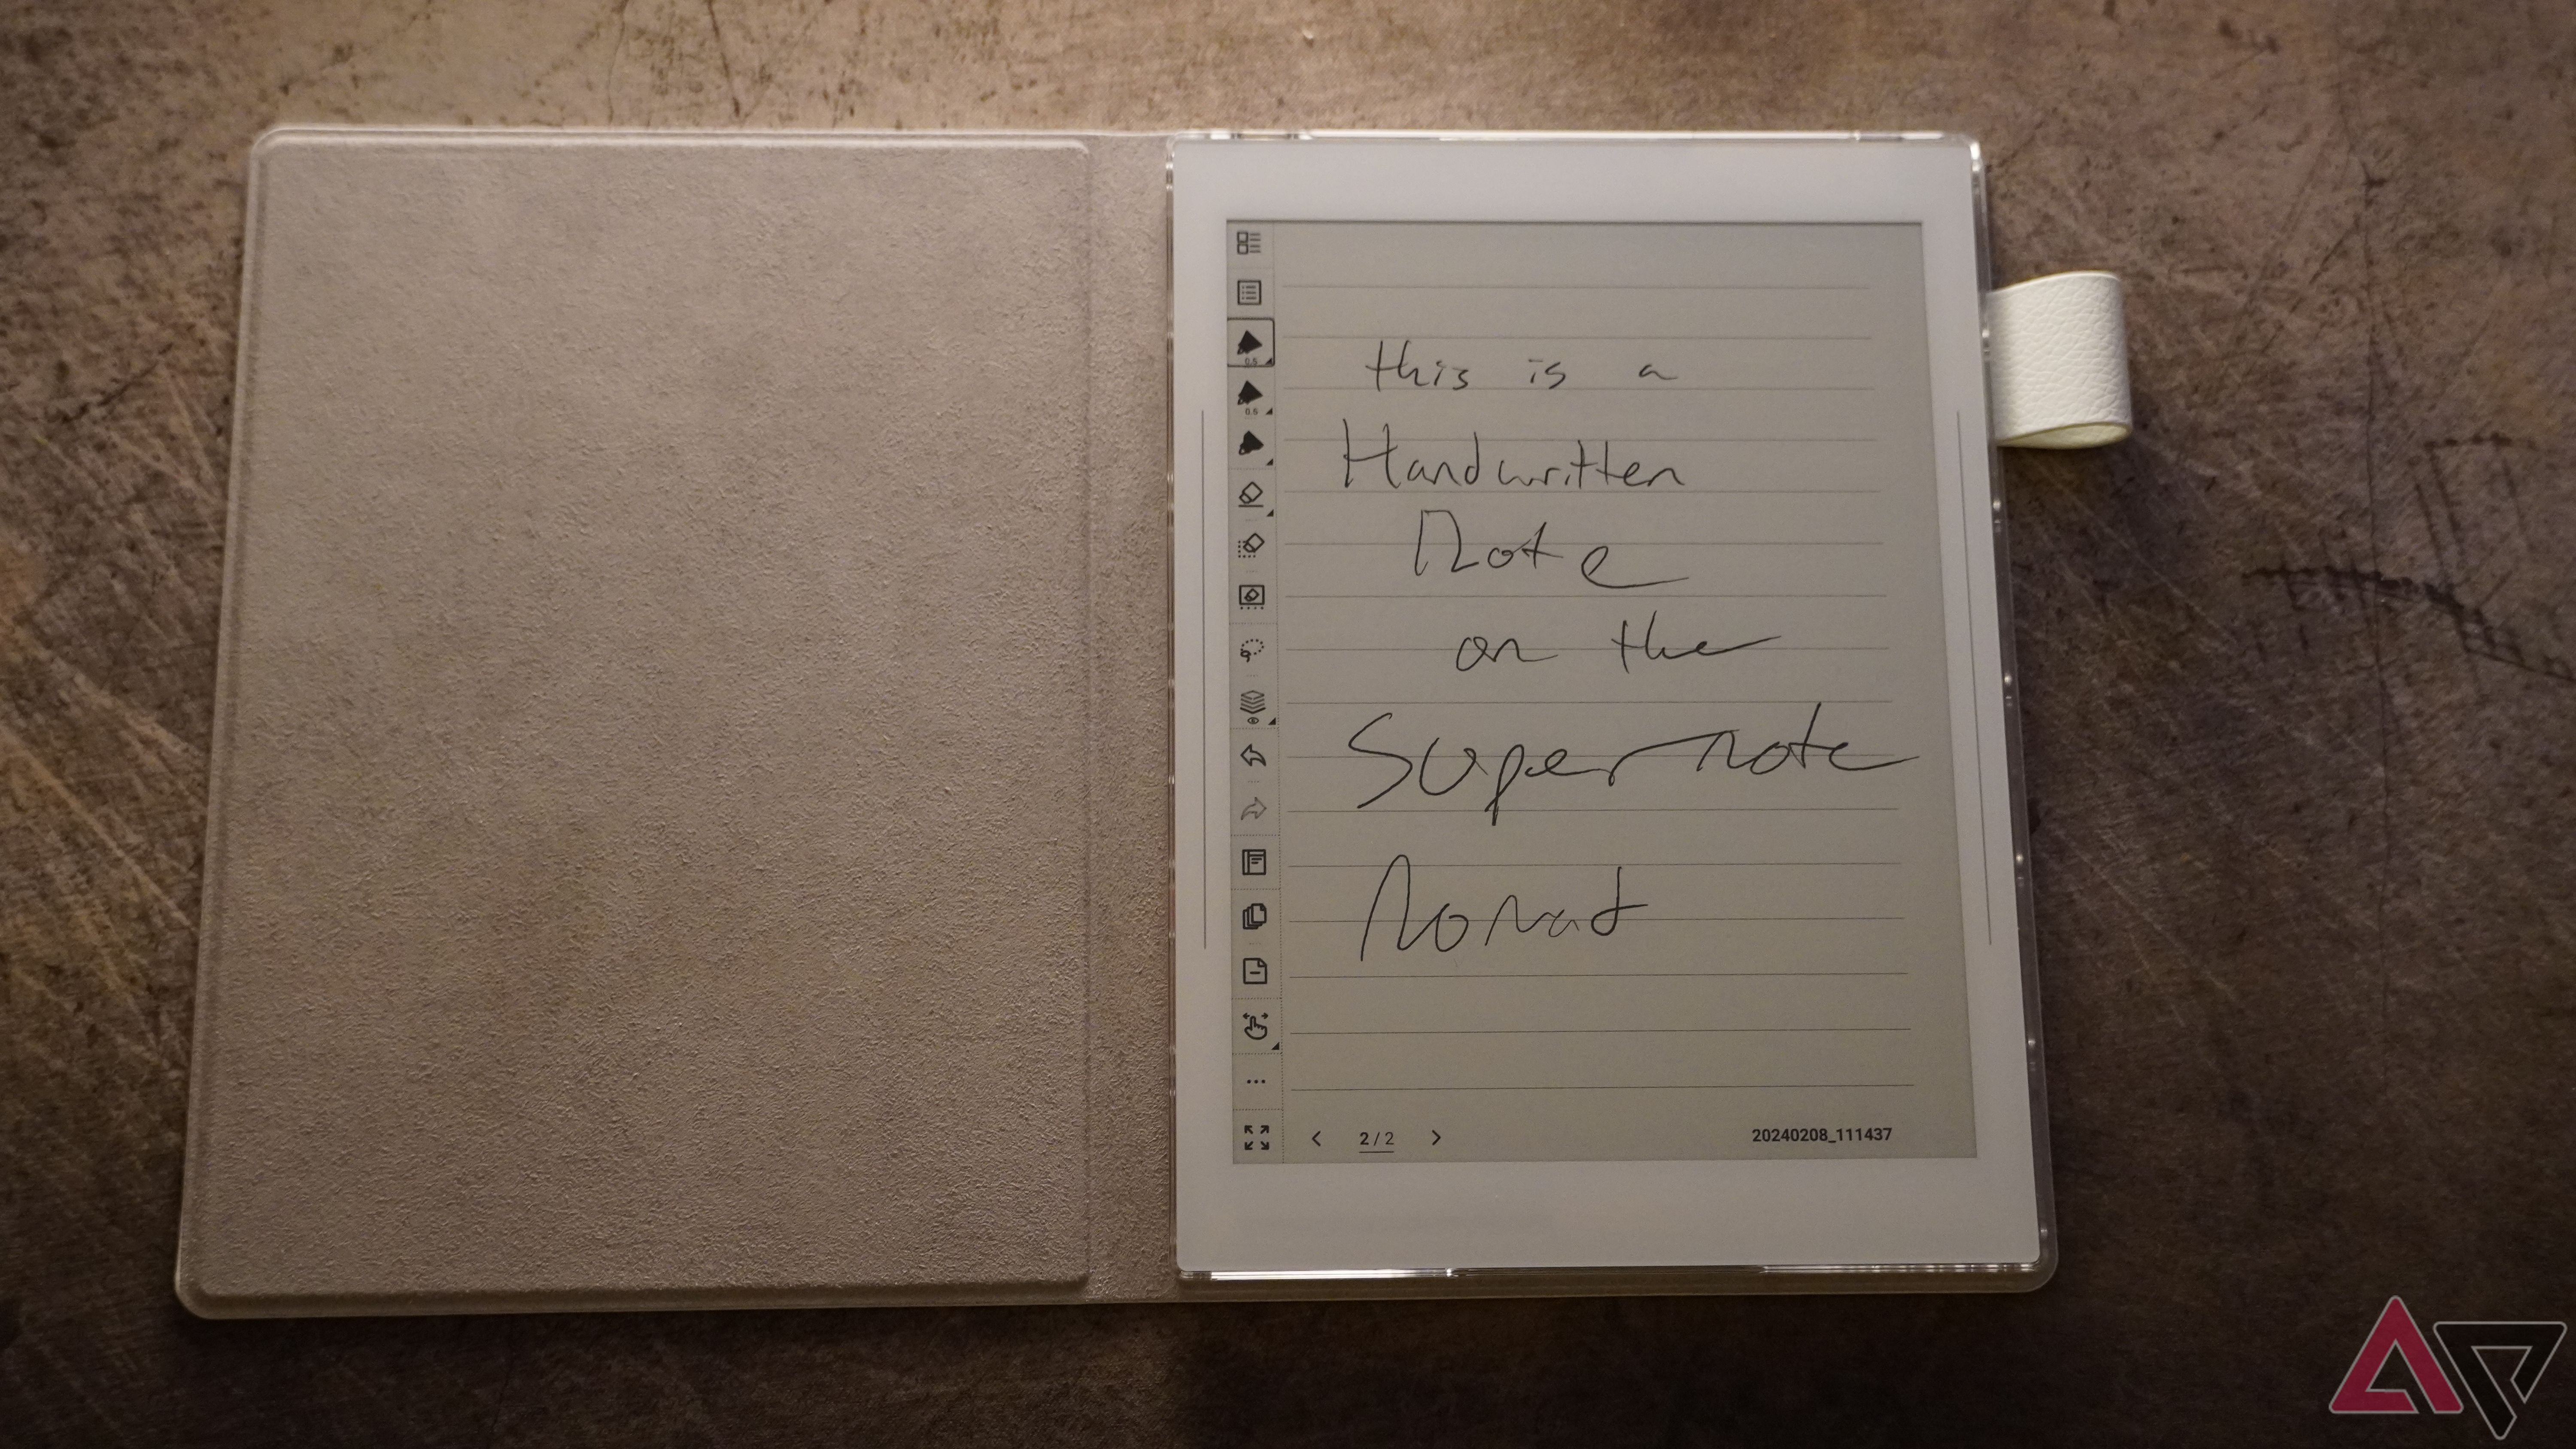 Supernote Nomad writing tablet with a note written onto it